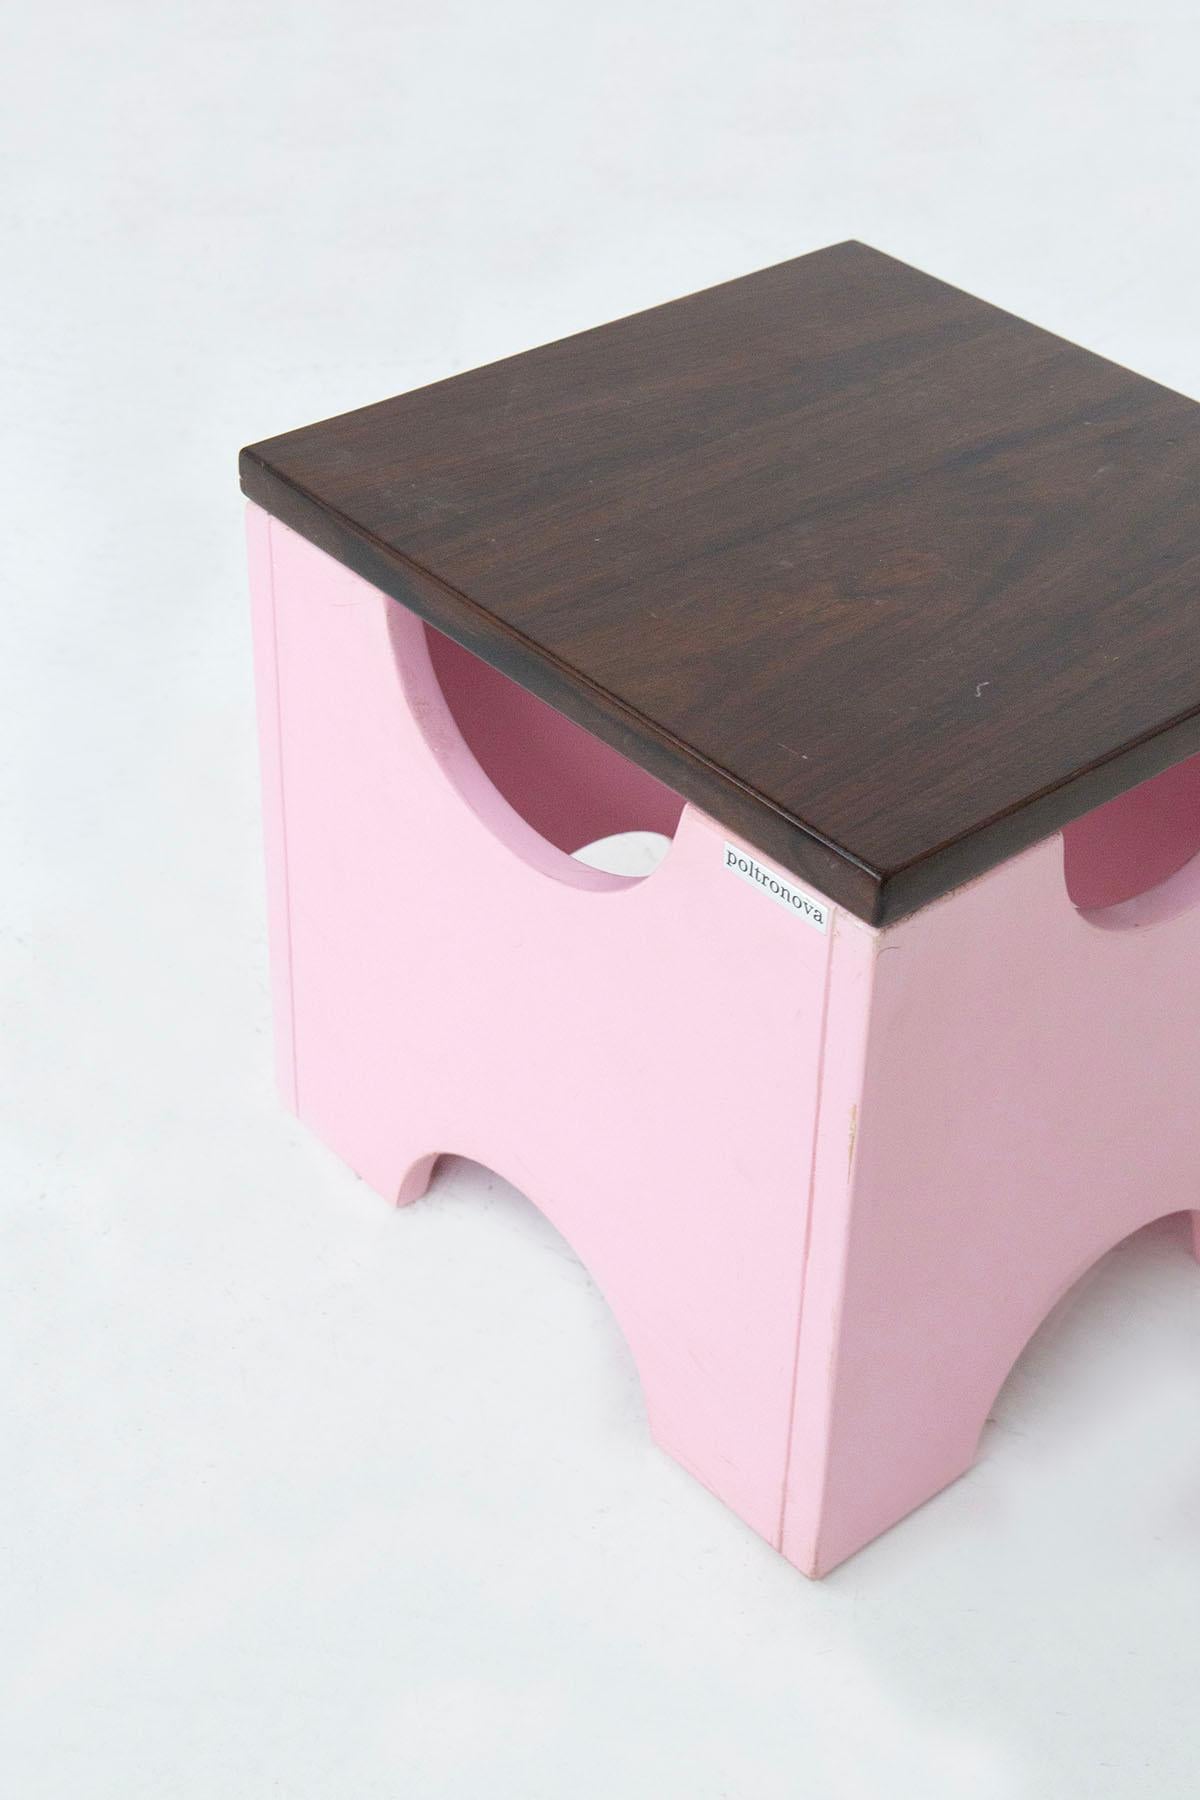 Mid-20th Century Ettore Sottsass Pair Os Dado Stools Mod. T29 in Pink Wood